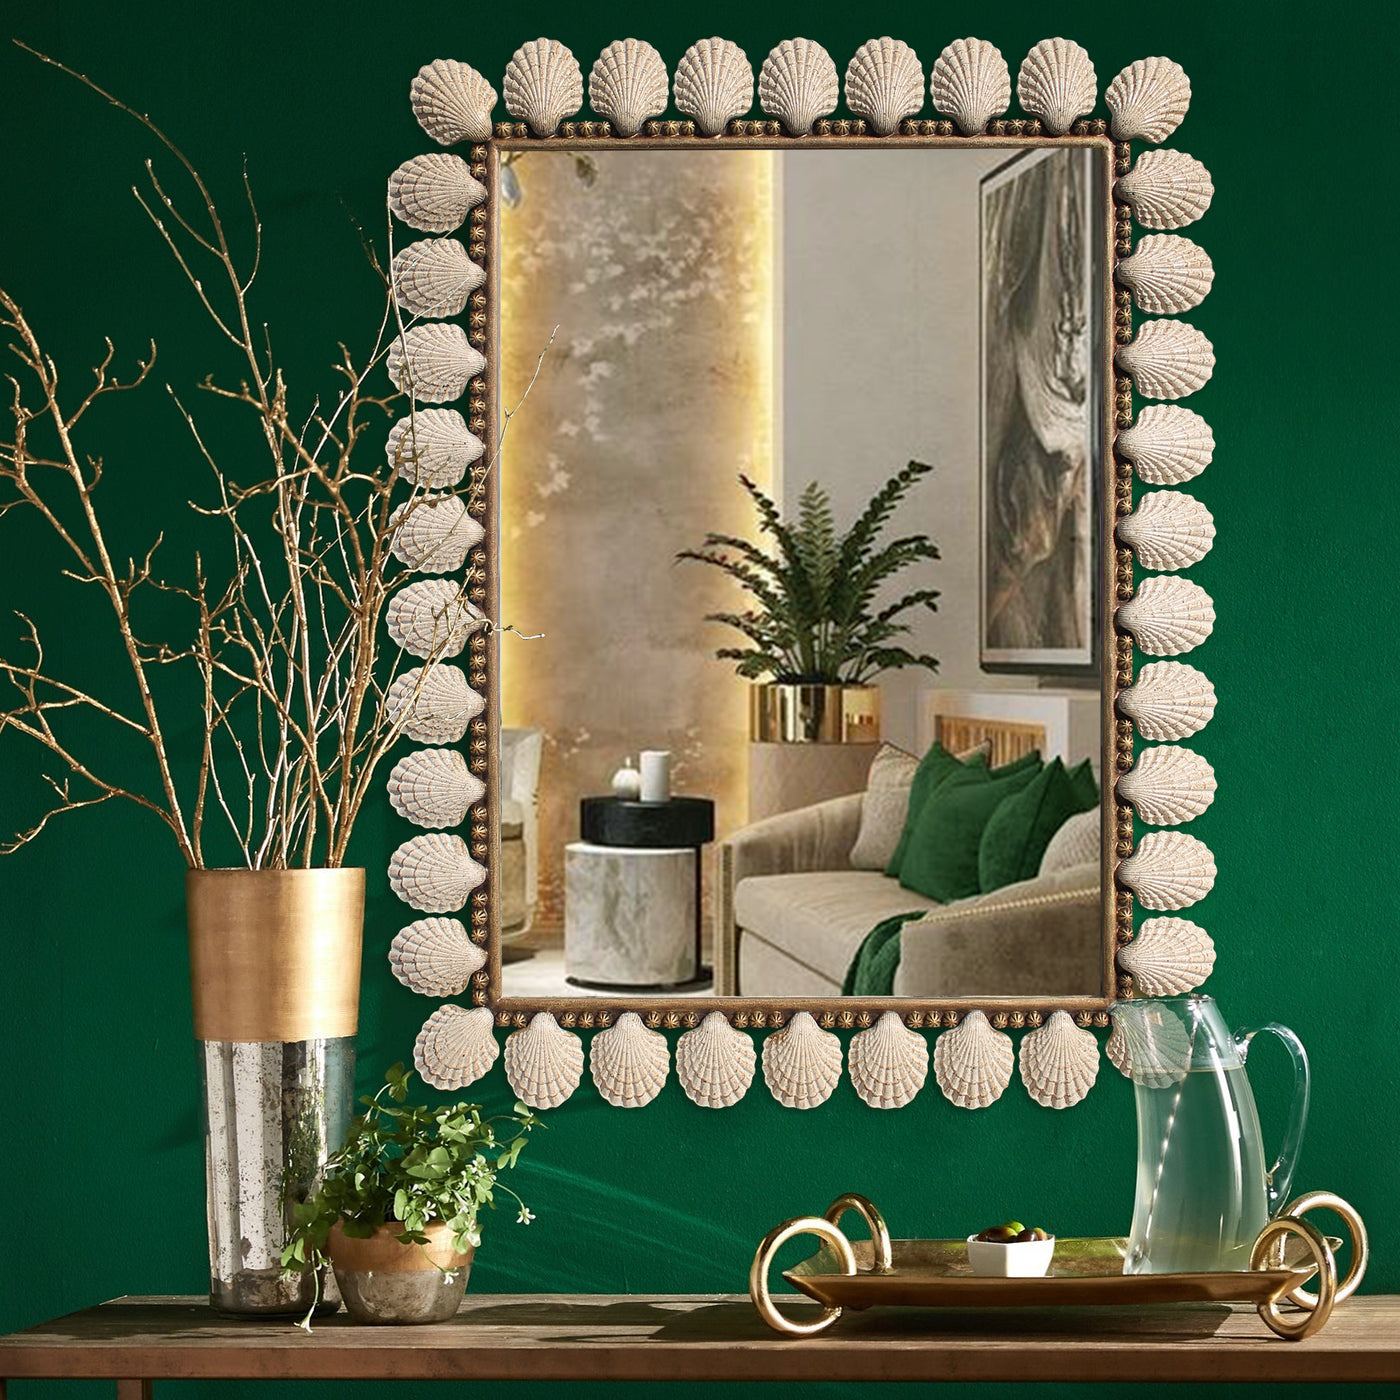 A luxurious rectangular mirror inspired by ocean seashells painted in an antique finish hangs on a green wall